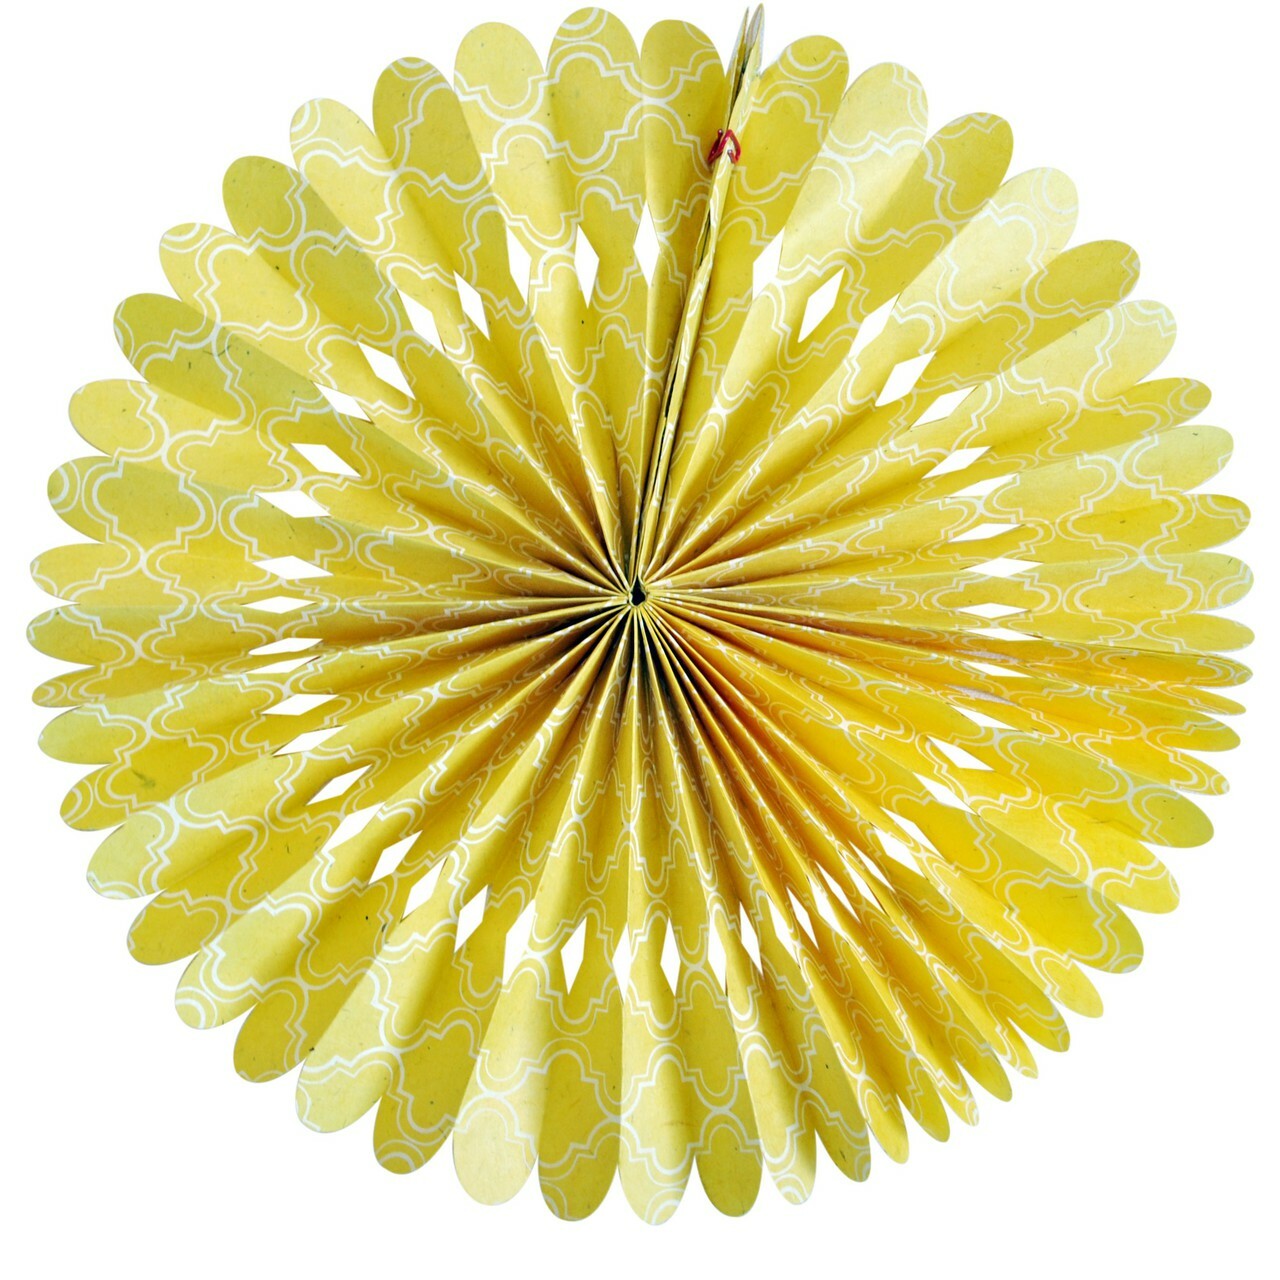 Handmade Lokta Paper Moroccan Yellow Rosette features a decorative white pattern on a yellow rosette.